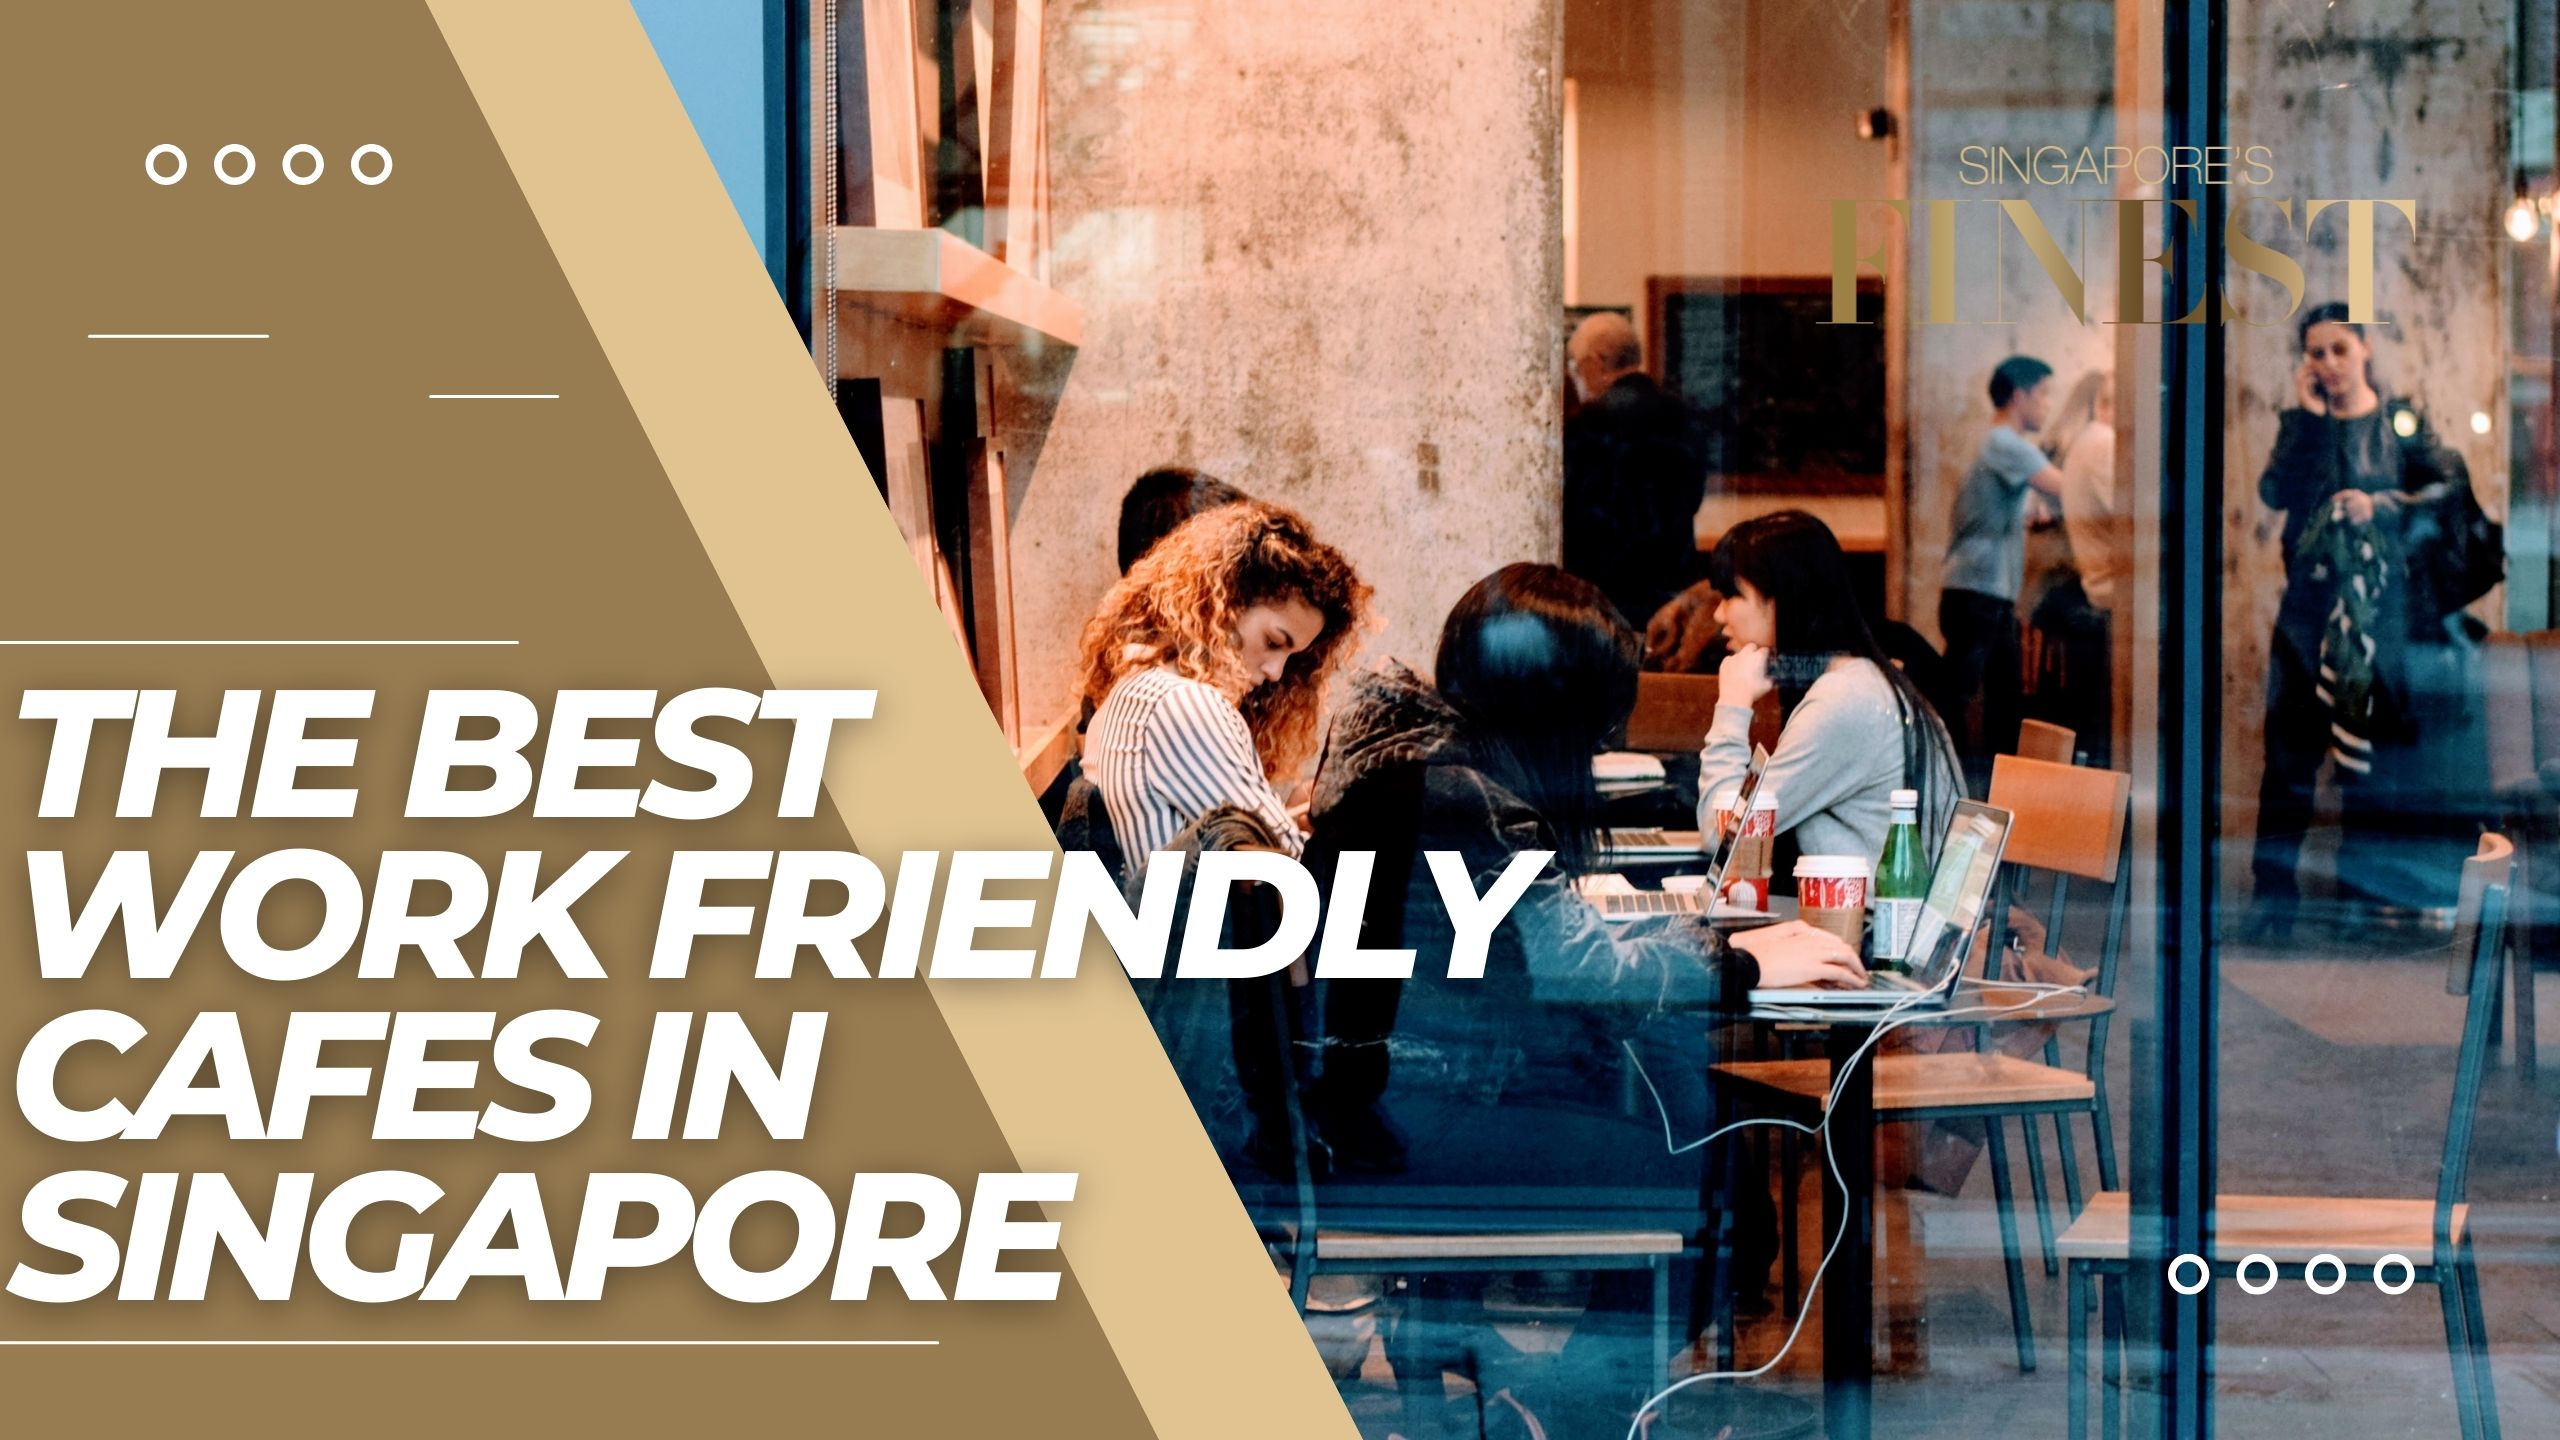 The Finest Work Friendly Cafes in Singapore